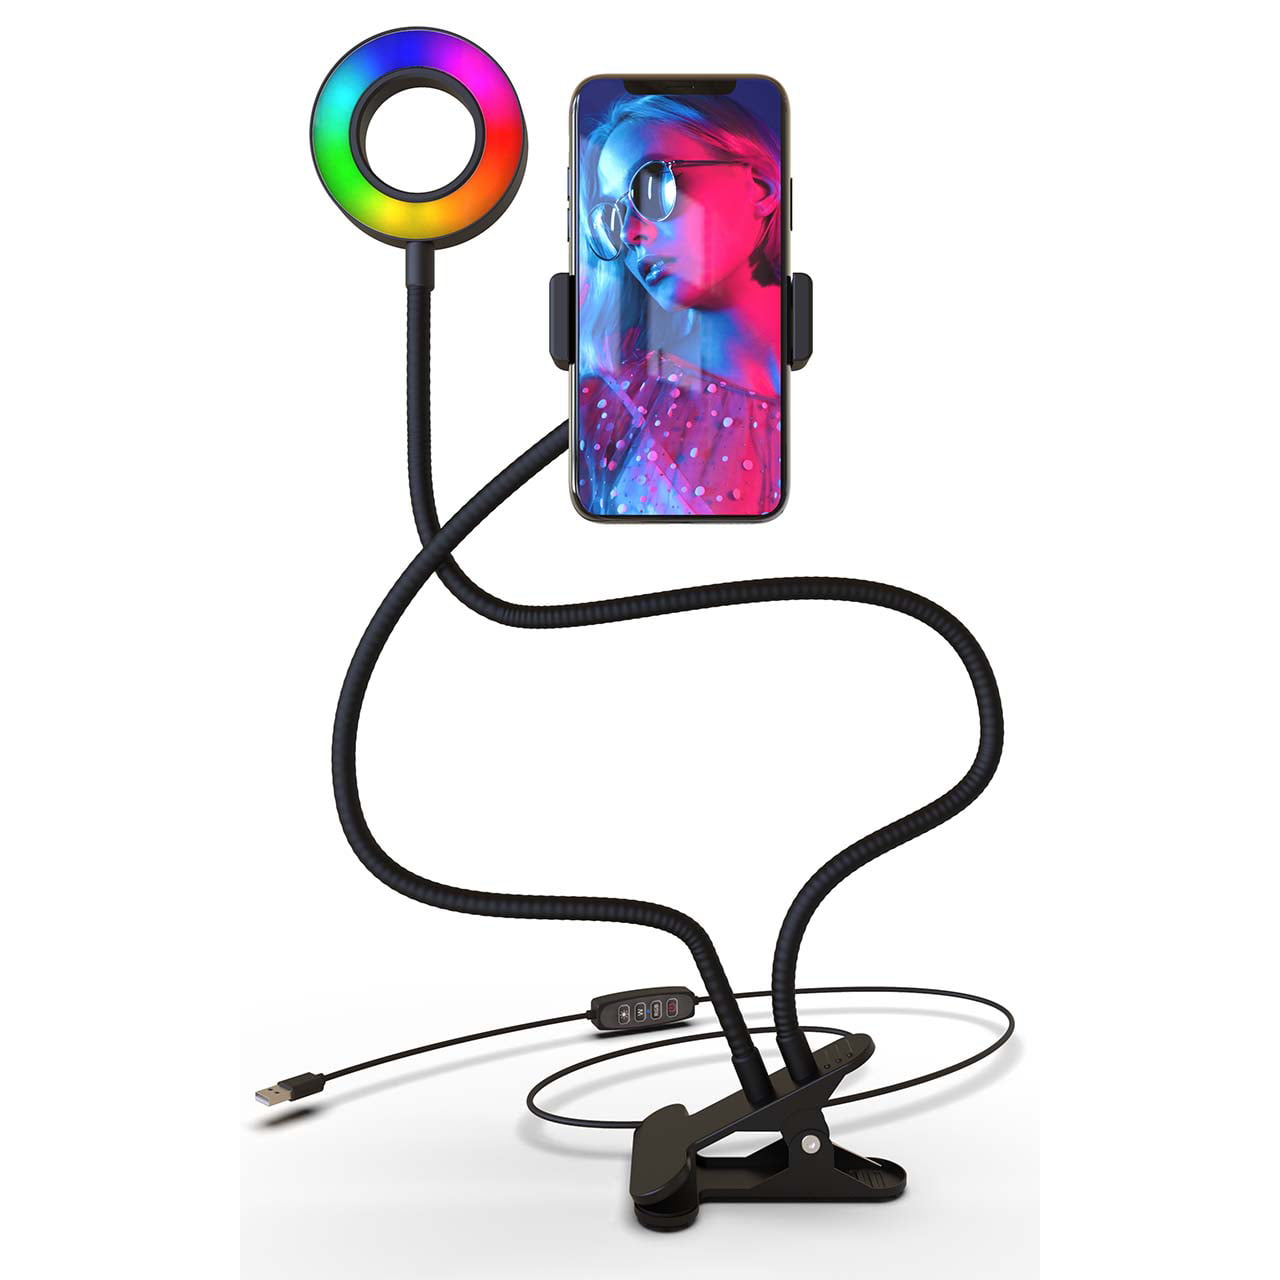 Bower Flexible White and RGB LED Ring Light with Smartphone Holder